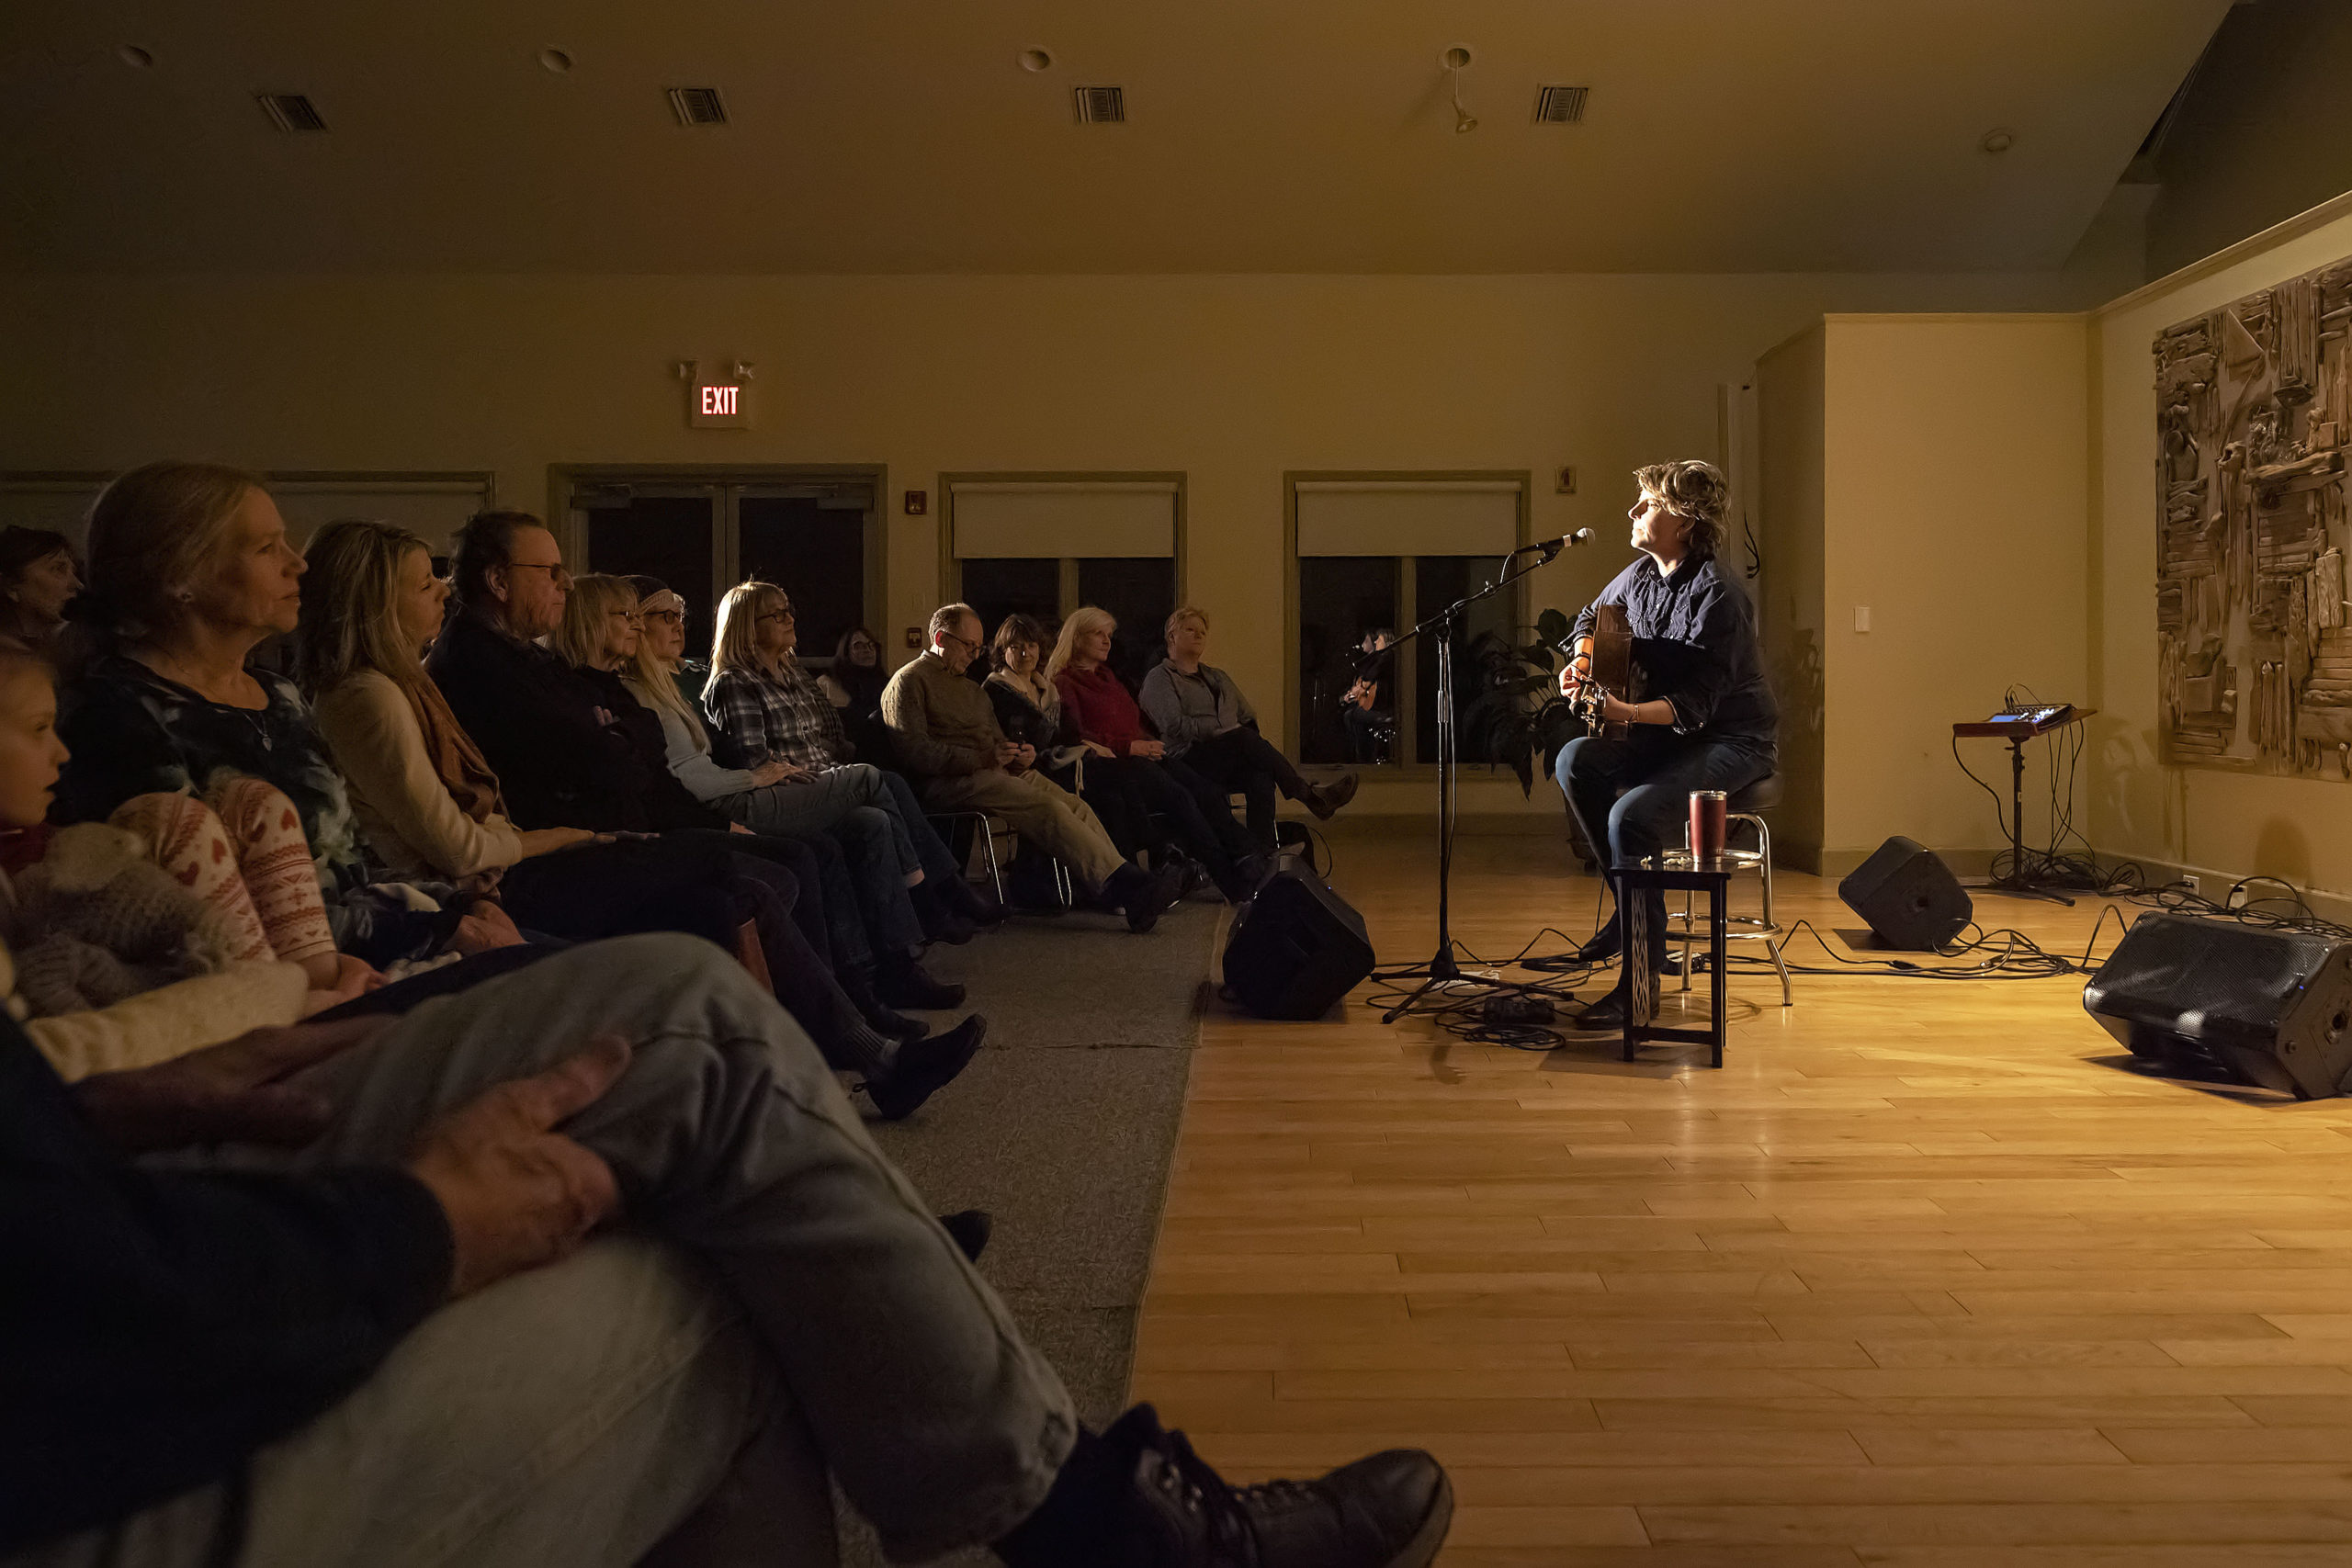 Inda Eaton was the guest at the sixth annual Songwriters Share Concert Series, hosted by the Unitarian Universalist Congregation in Bridgehampton on Friday. MICHAEL HELLER